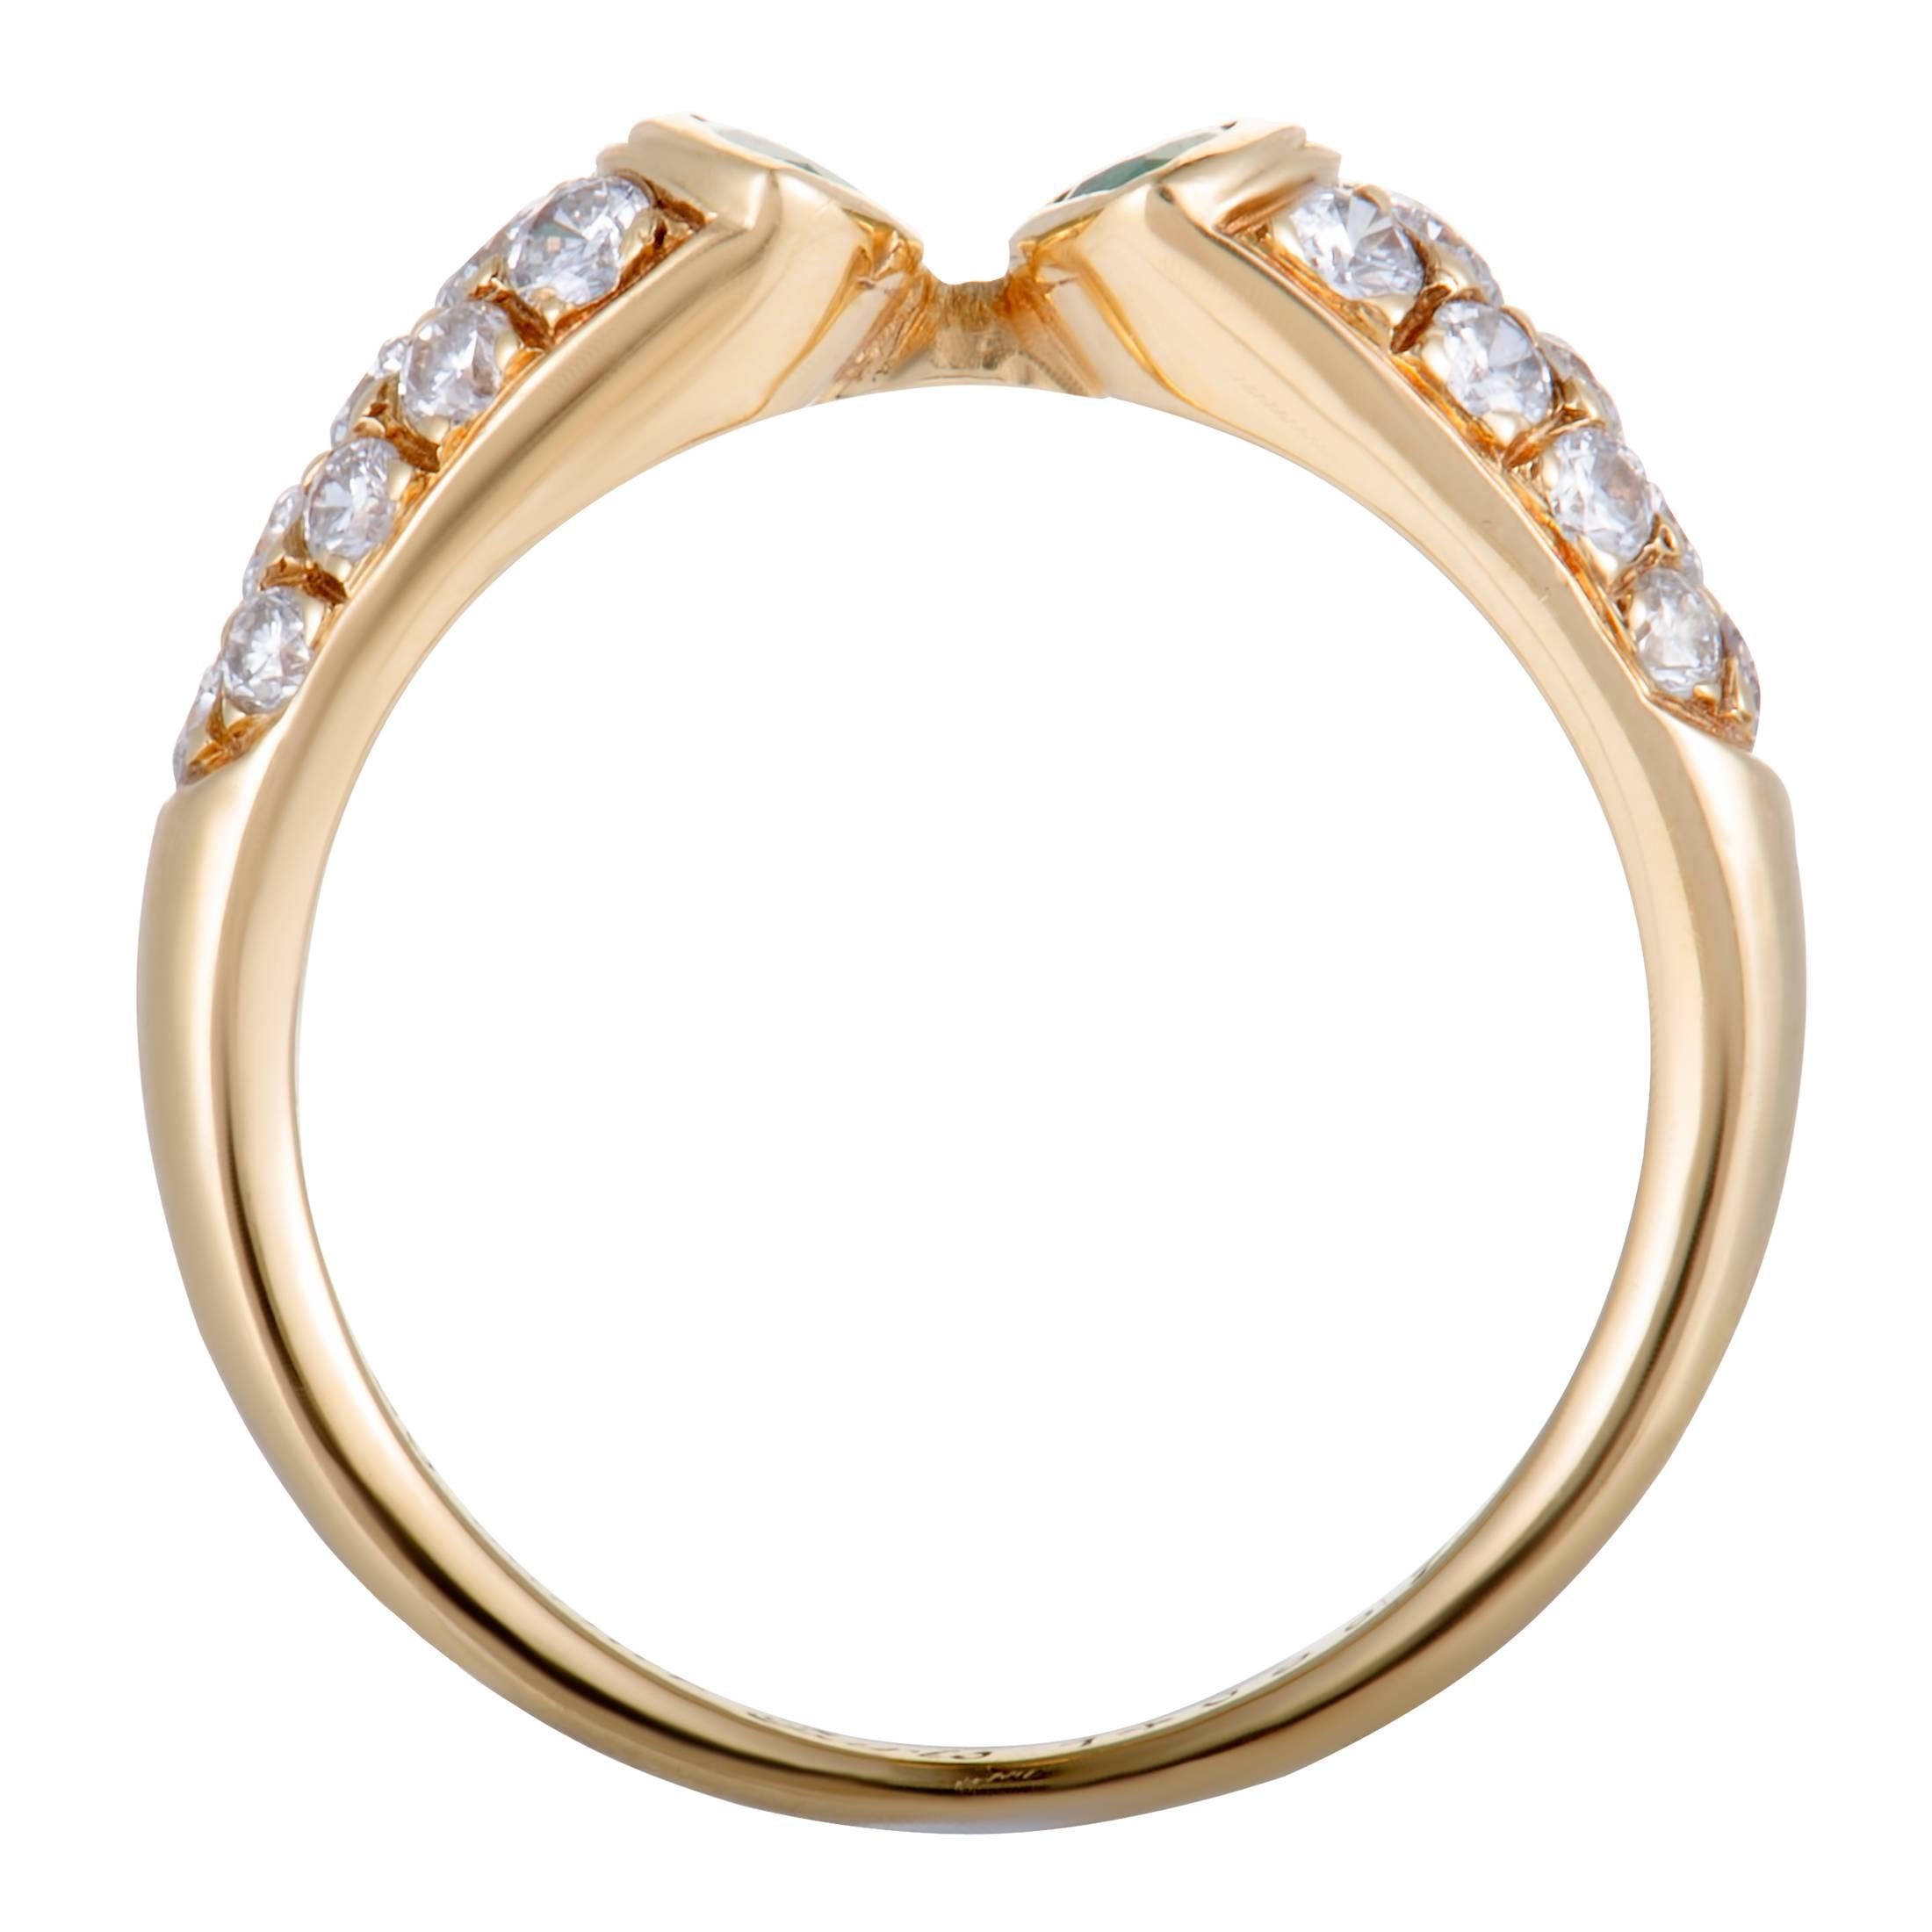 Add a nifty touch of opulence to your look with this stunning ring made from 18K yellow gold that endears with its refined design and lavish décor. Presented by Cartier, the ring is embellished with 0.50 carats of emeralds and approximately 0.60